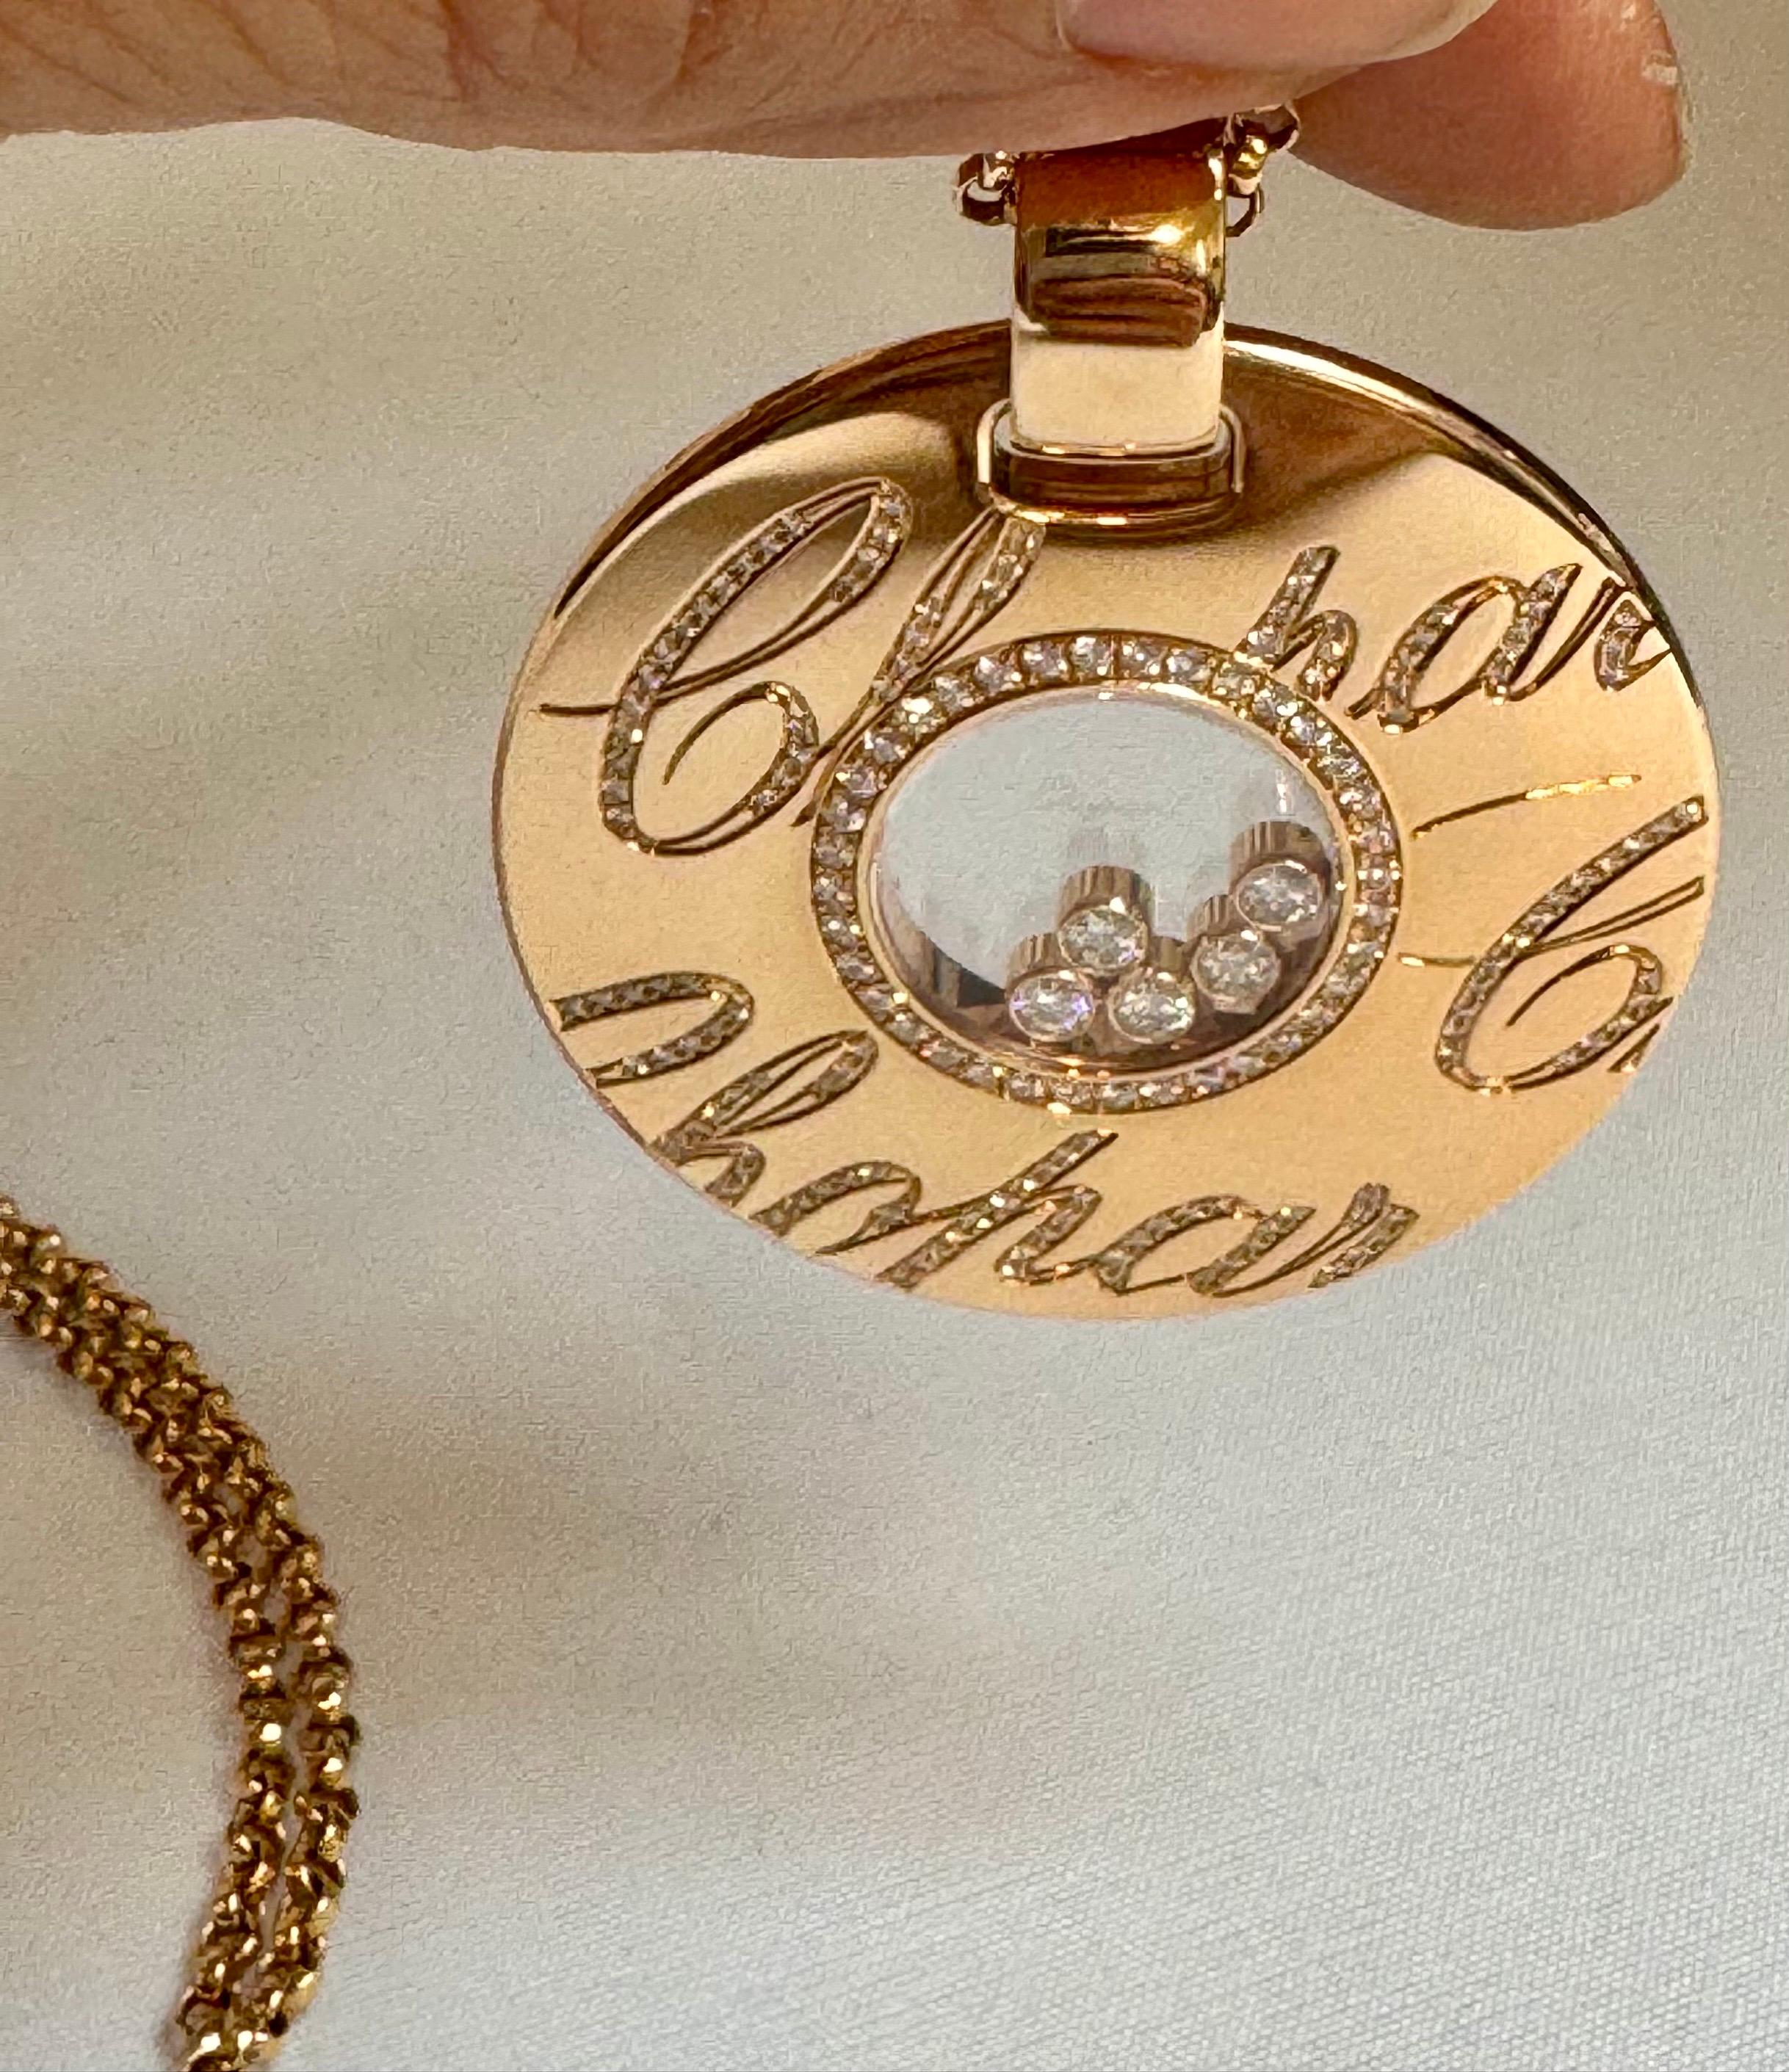 Chopard Chopardissimo 18Karat Yellow Gold Diamond Pendant Necklace Large, Estate In Excellent Condition For Sale In New York, NY